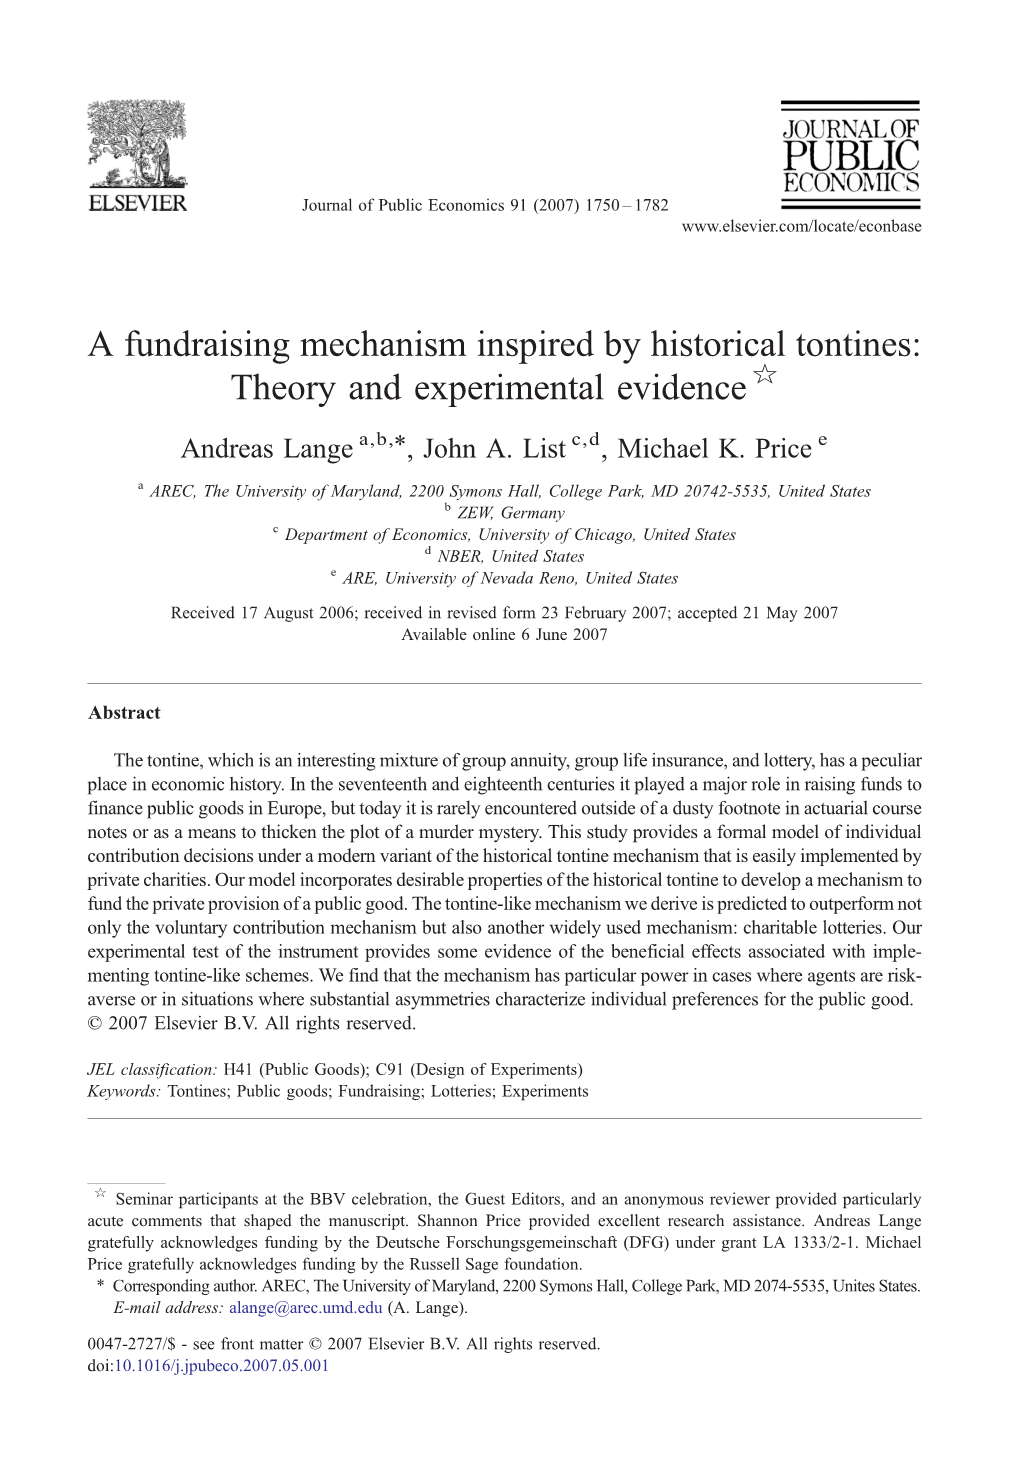 A Fundraising Mechanism Inspired by Historical Tontines: Theory and Experimental Evidence ☆ ⁎ Andreas Lange A,B, , John A